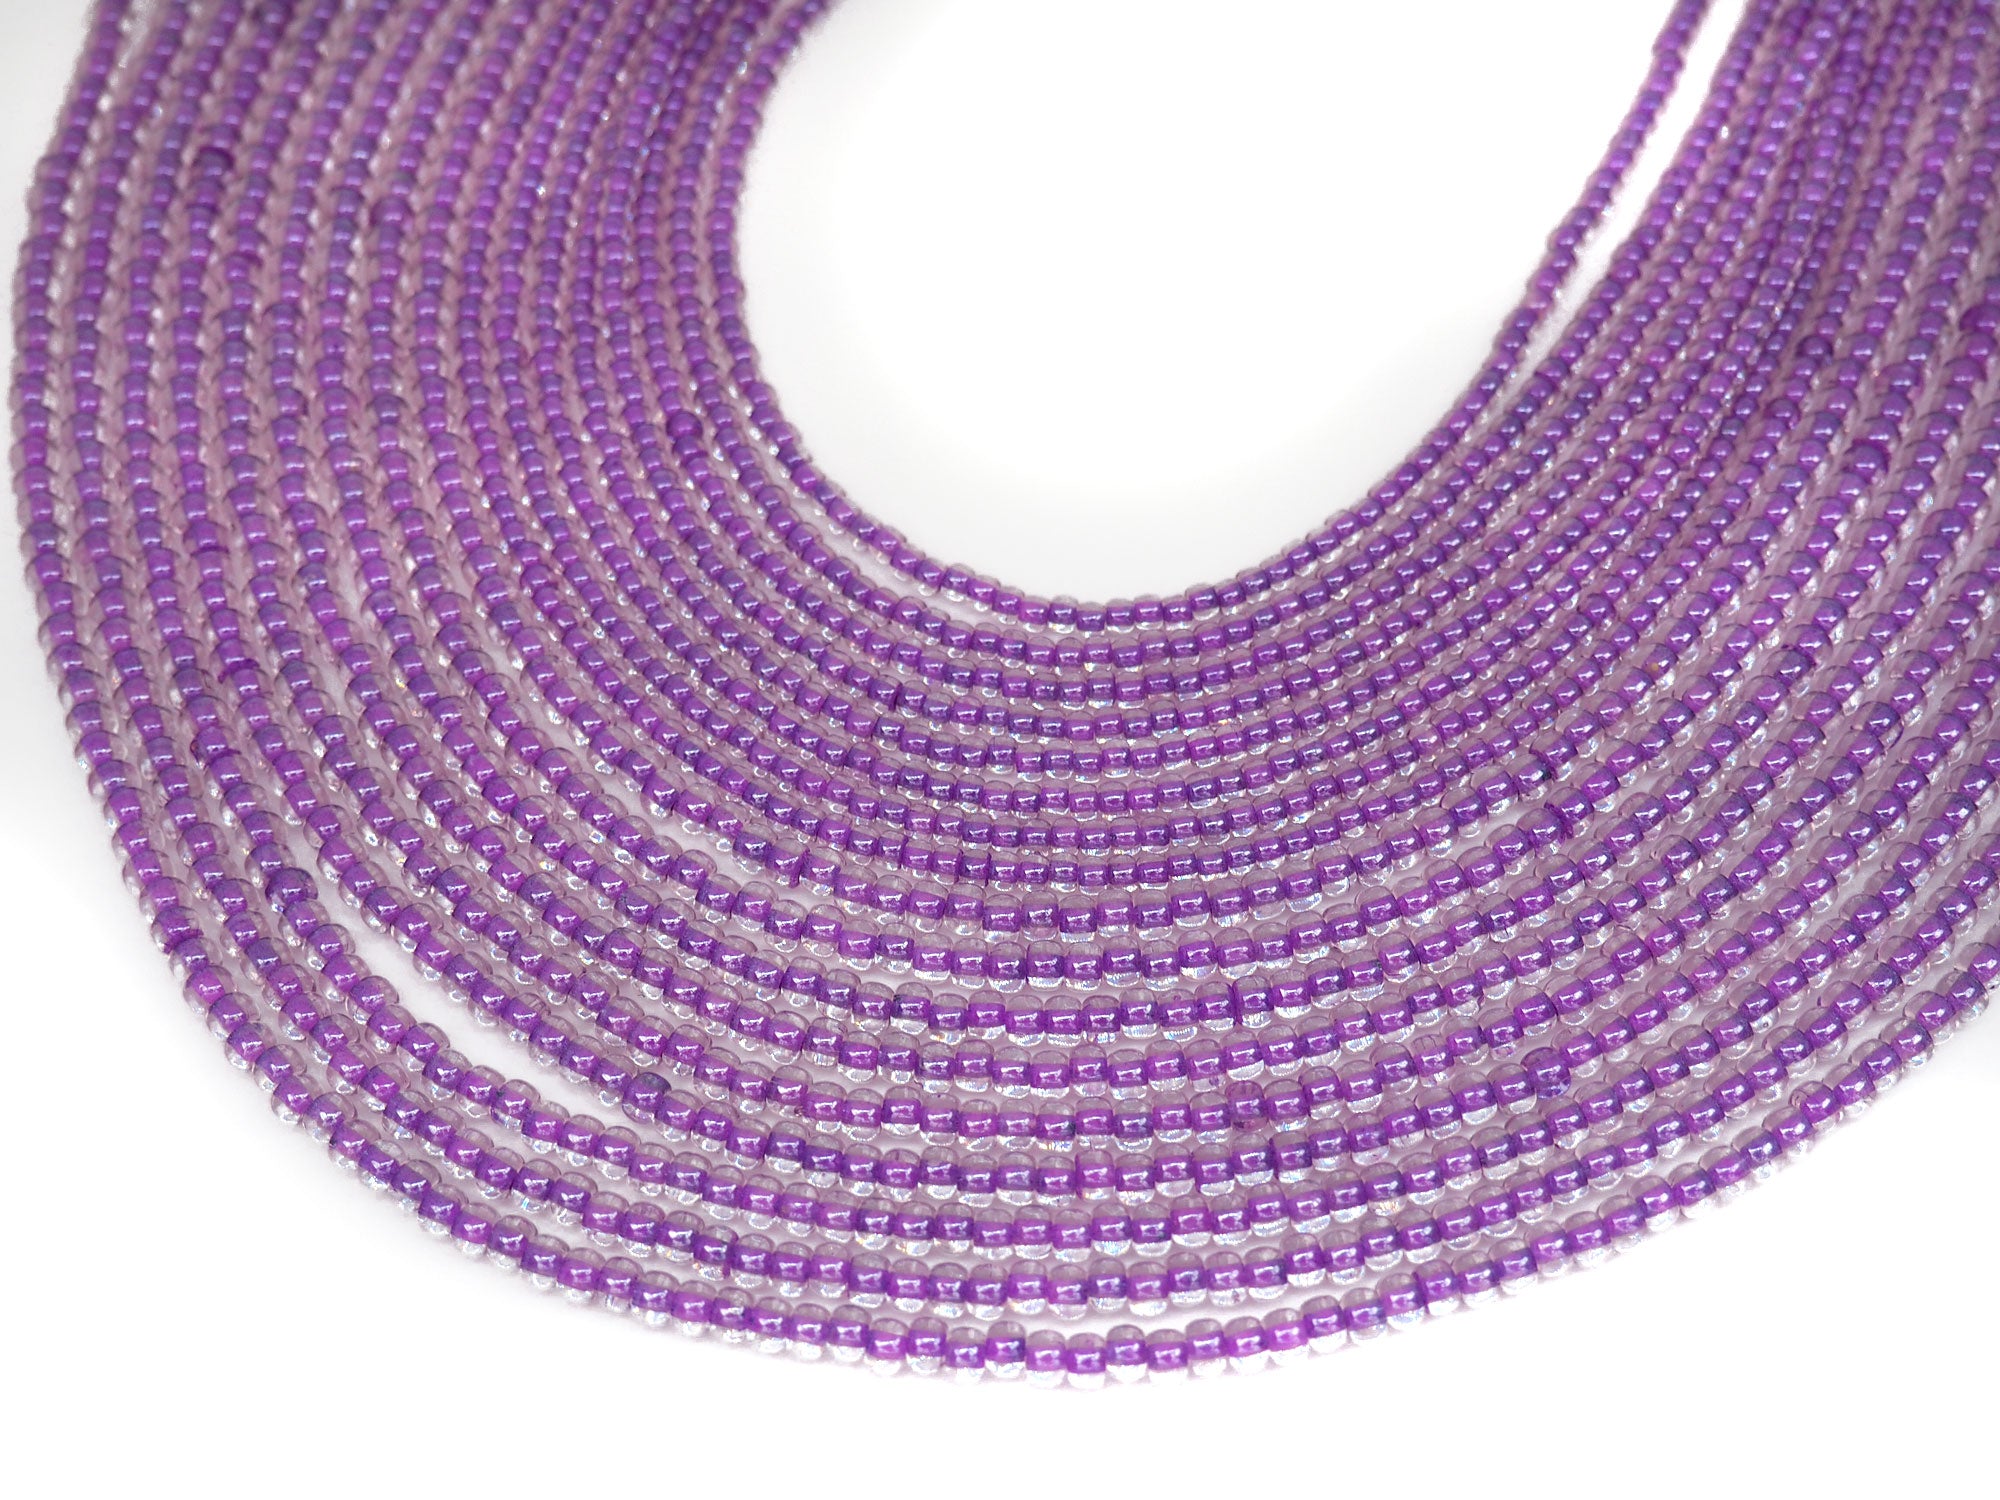 'Czech Round Smooth Pressed POPPY Glass Beads in Crystal Satin Violet Lined color, 2x3mm (size 8/0), 3x4mm (size 6/0) Druk Bead